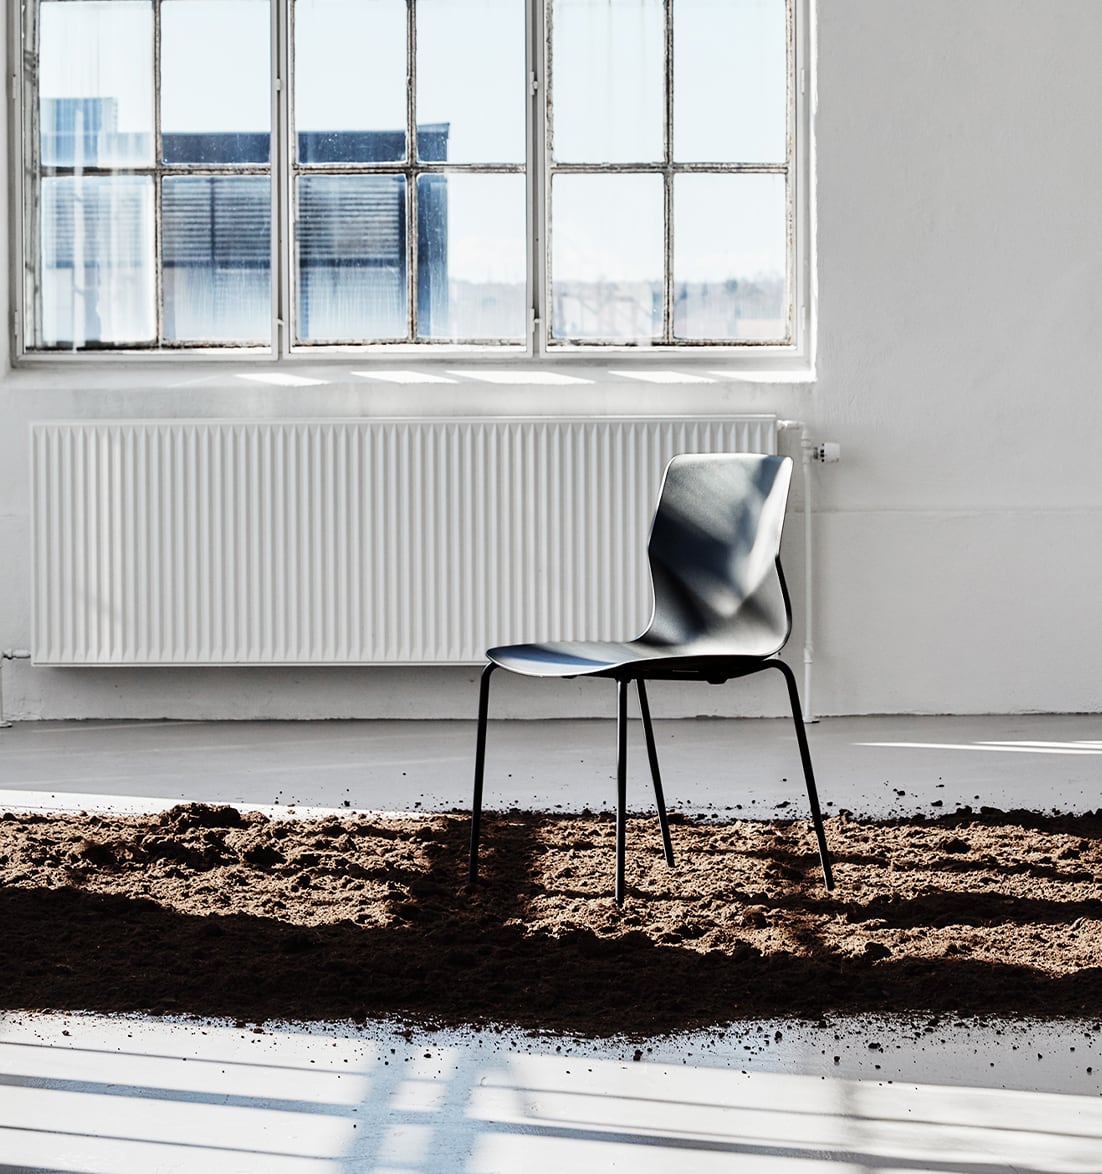 A black chair sits on a dirt floor in front of a window.